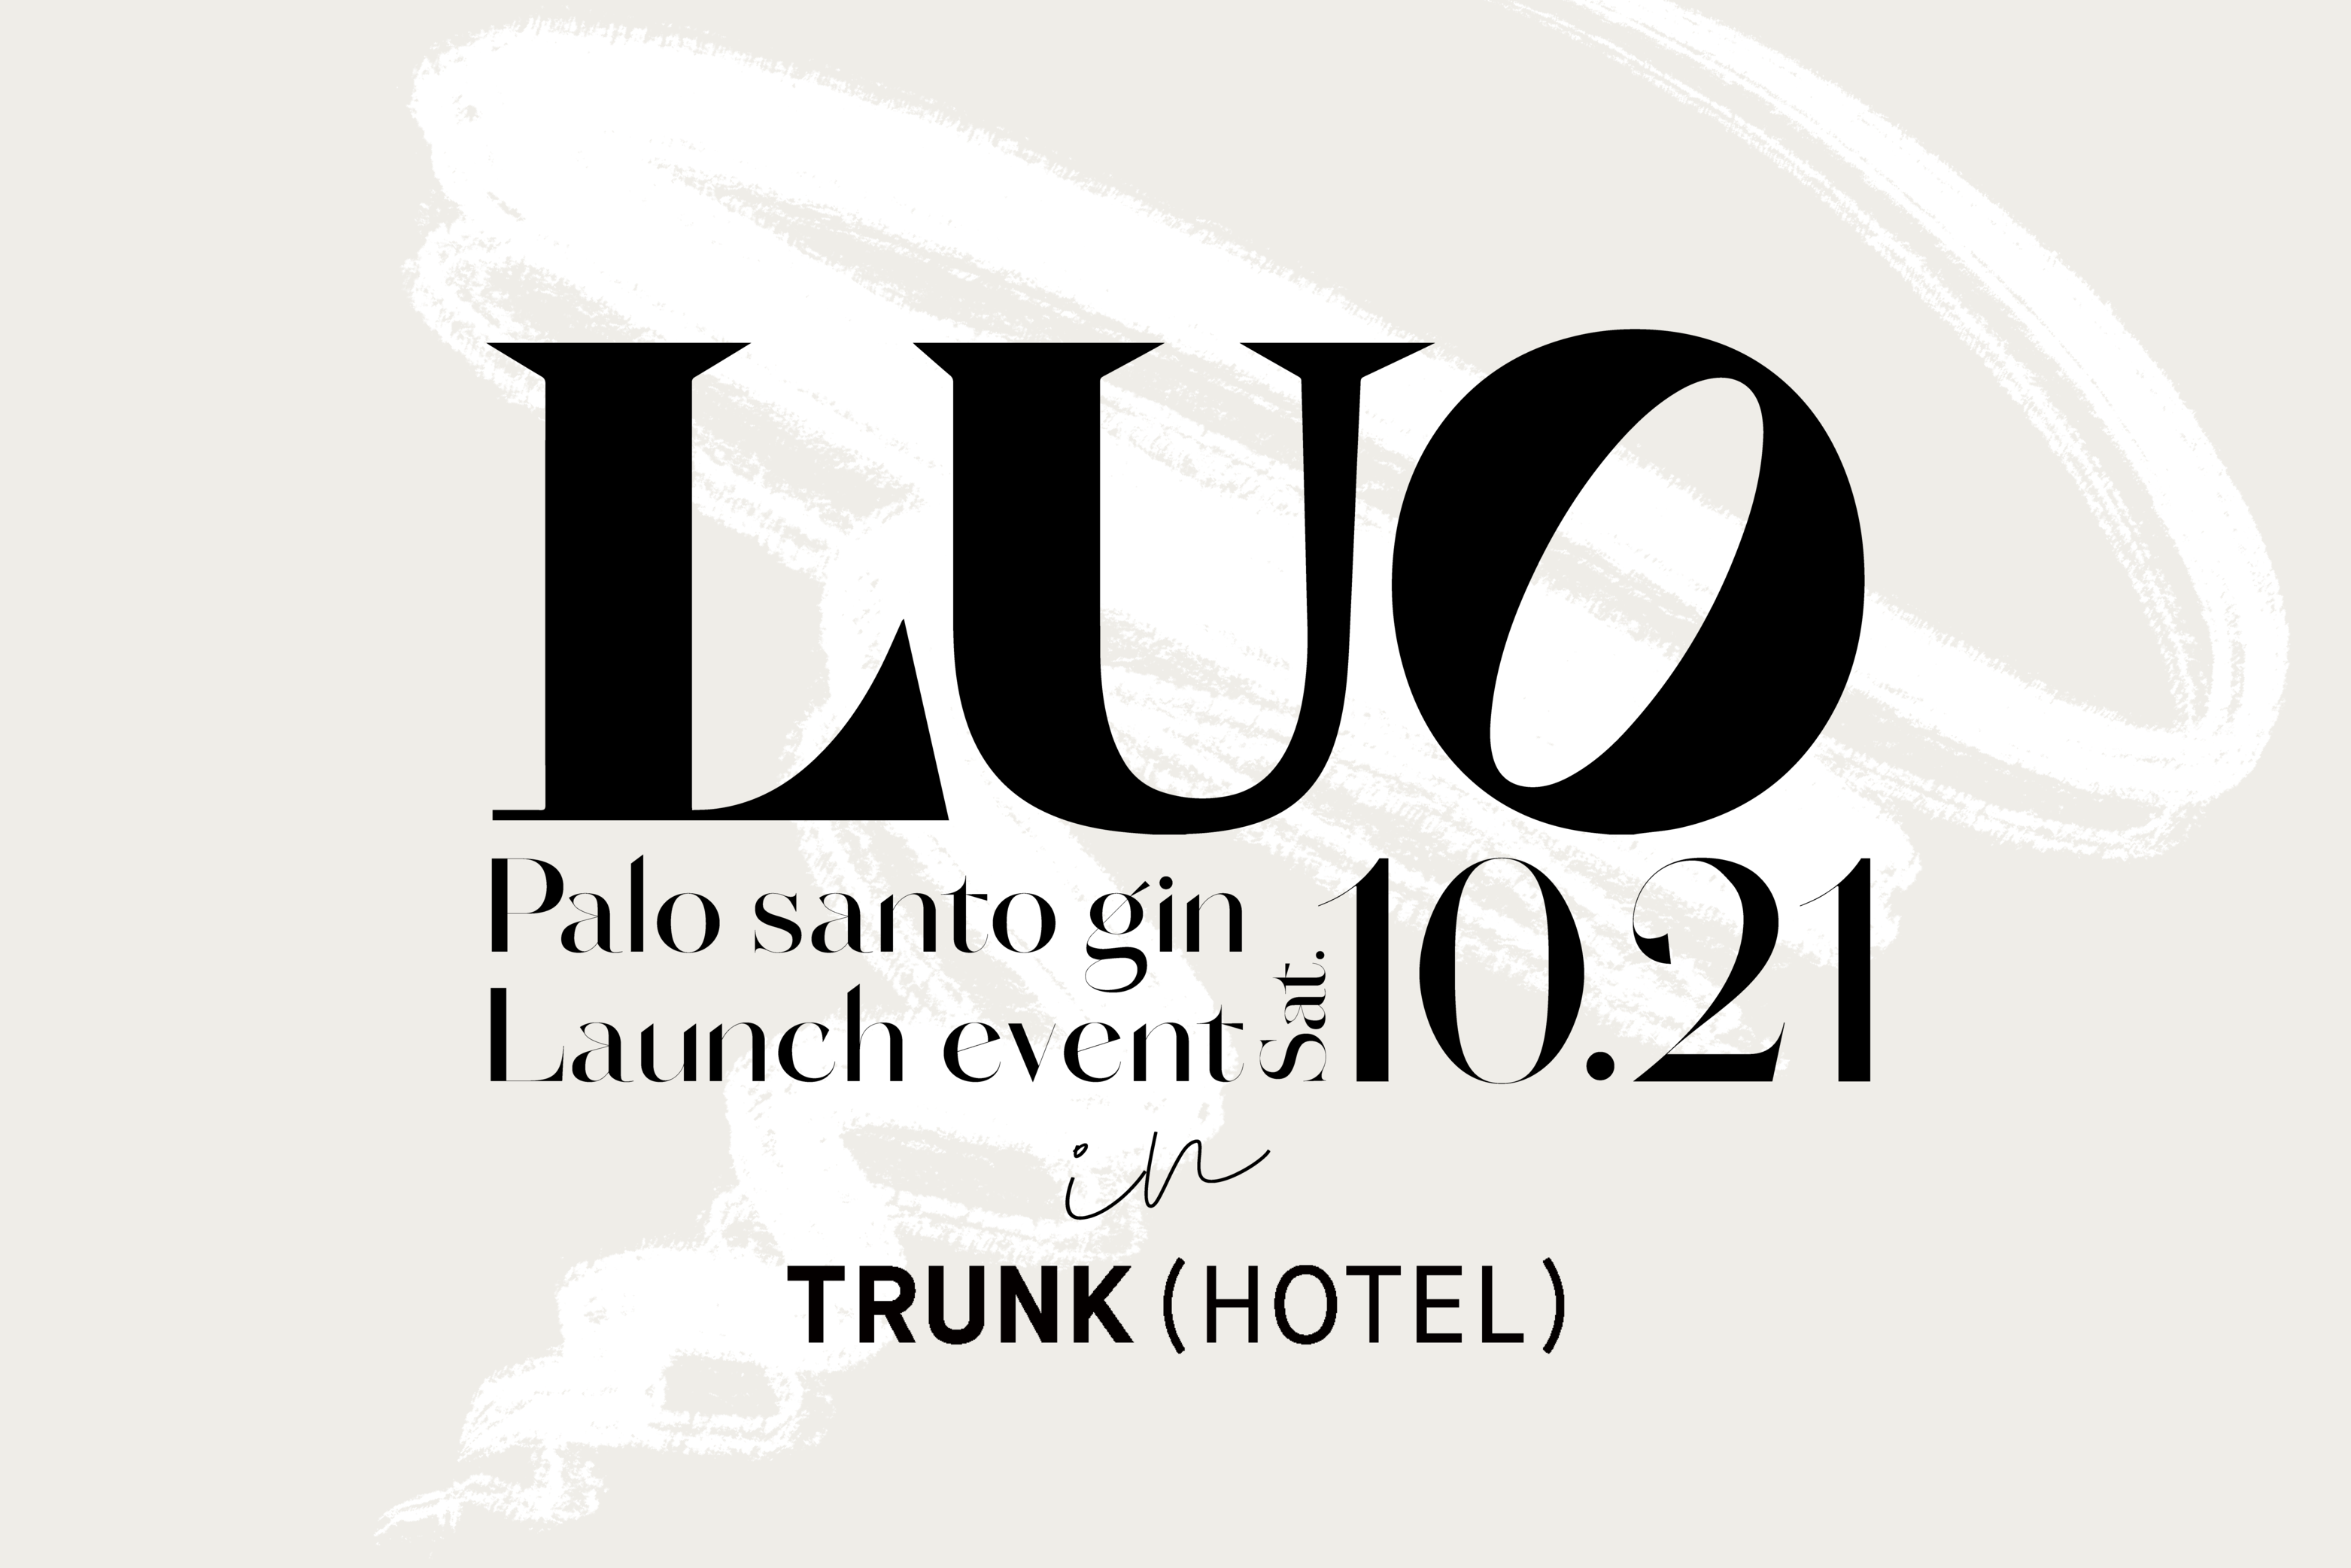 LUO Palo santo gin Launch event in TRUNK(HOTEL)